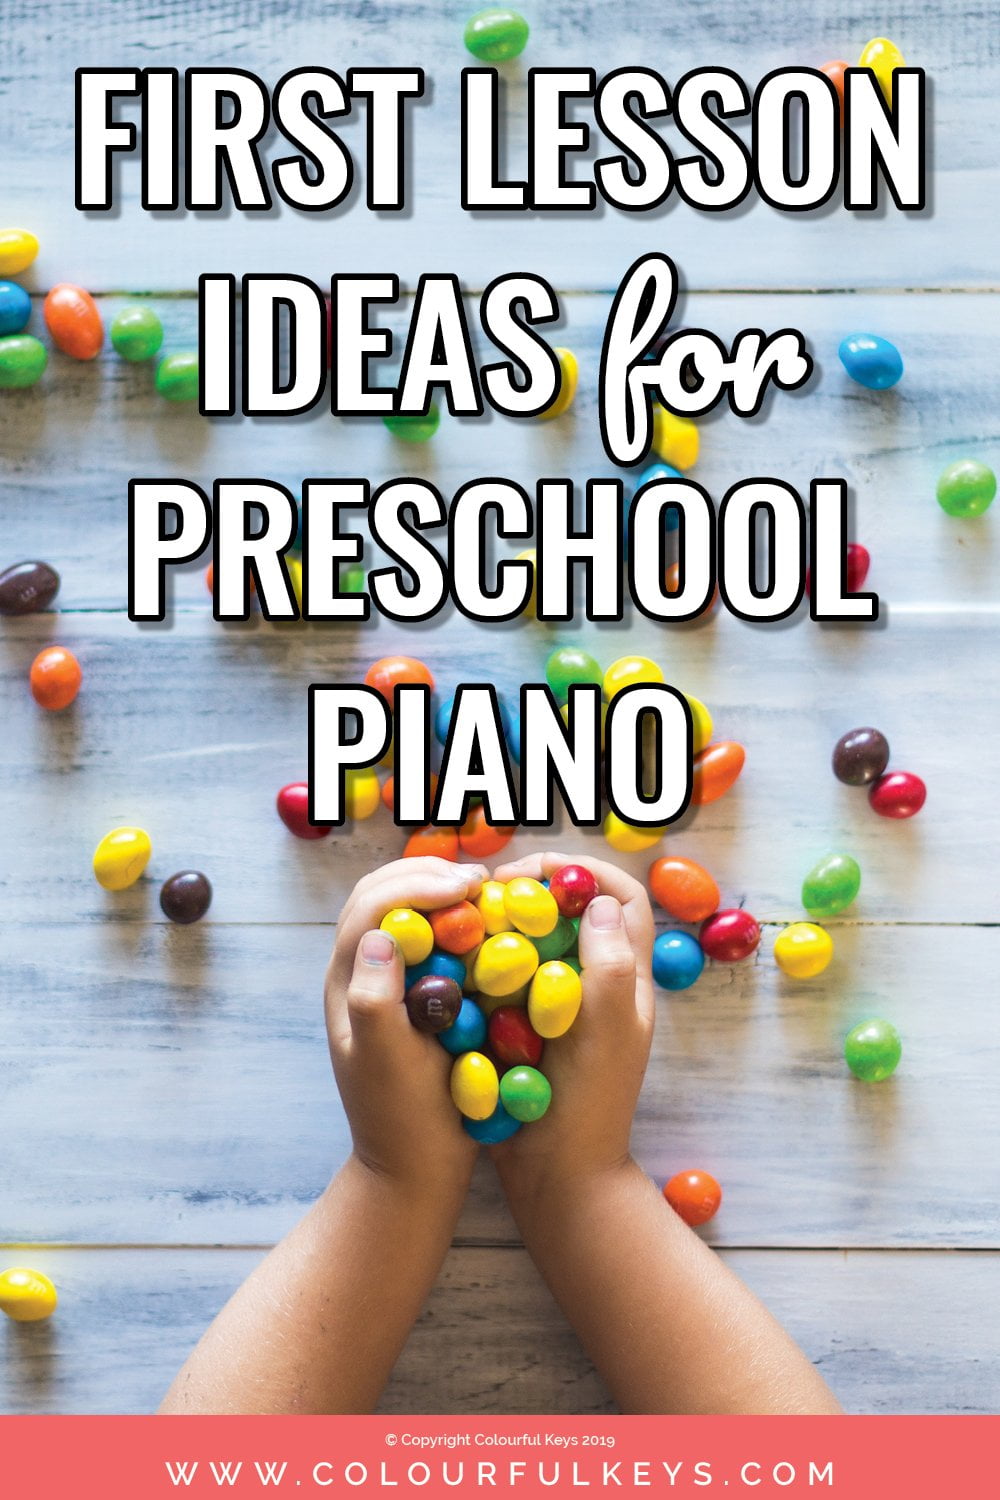 Great ideas for first piano lessons with preschool students. Practical and effective advice for piano teachers.